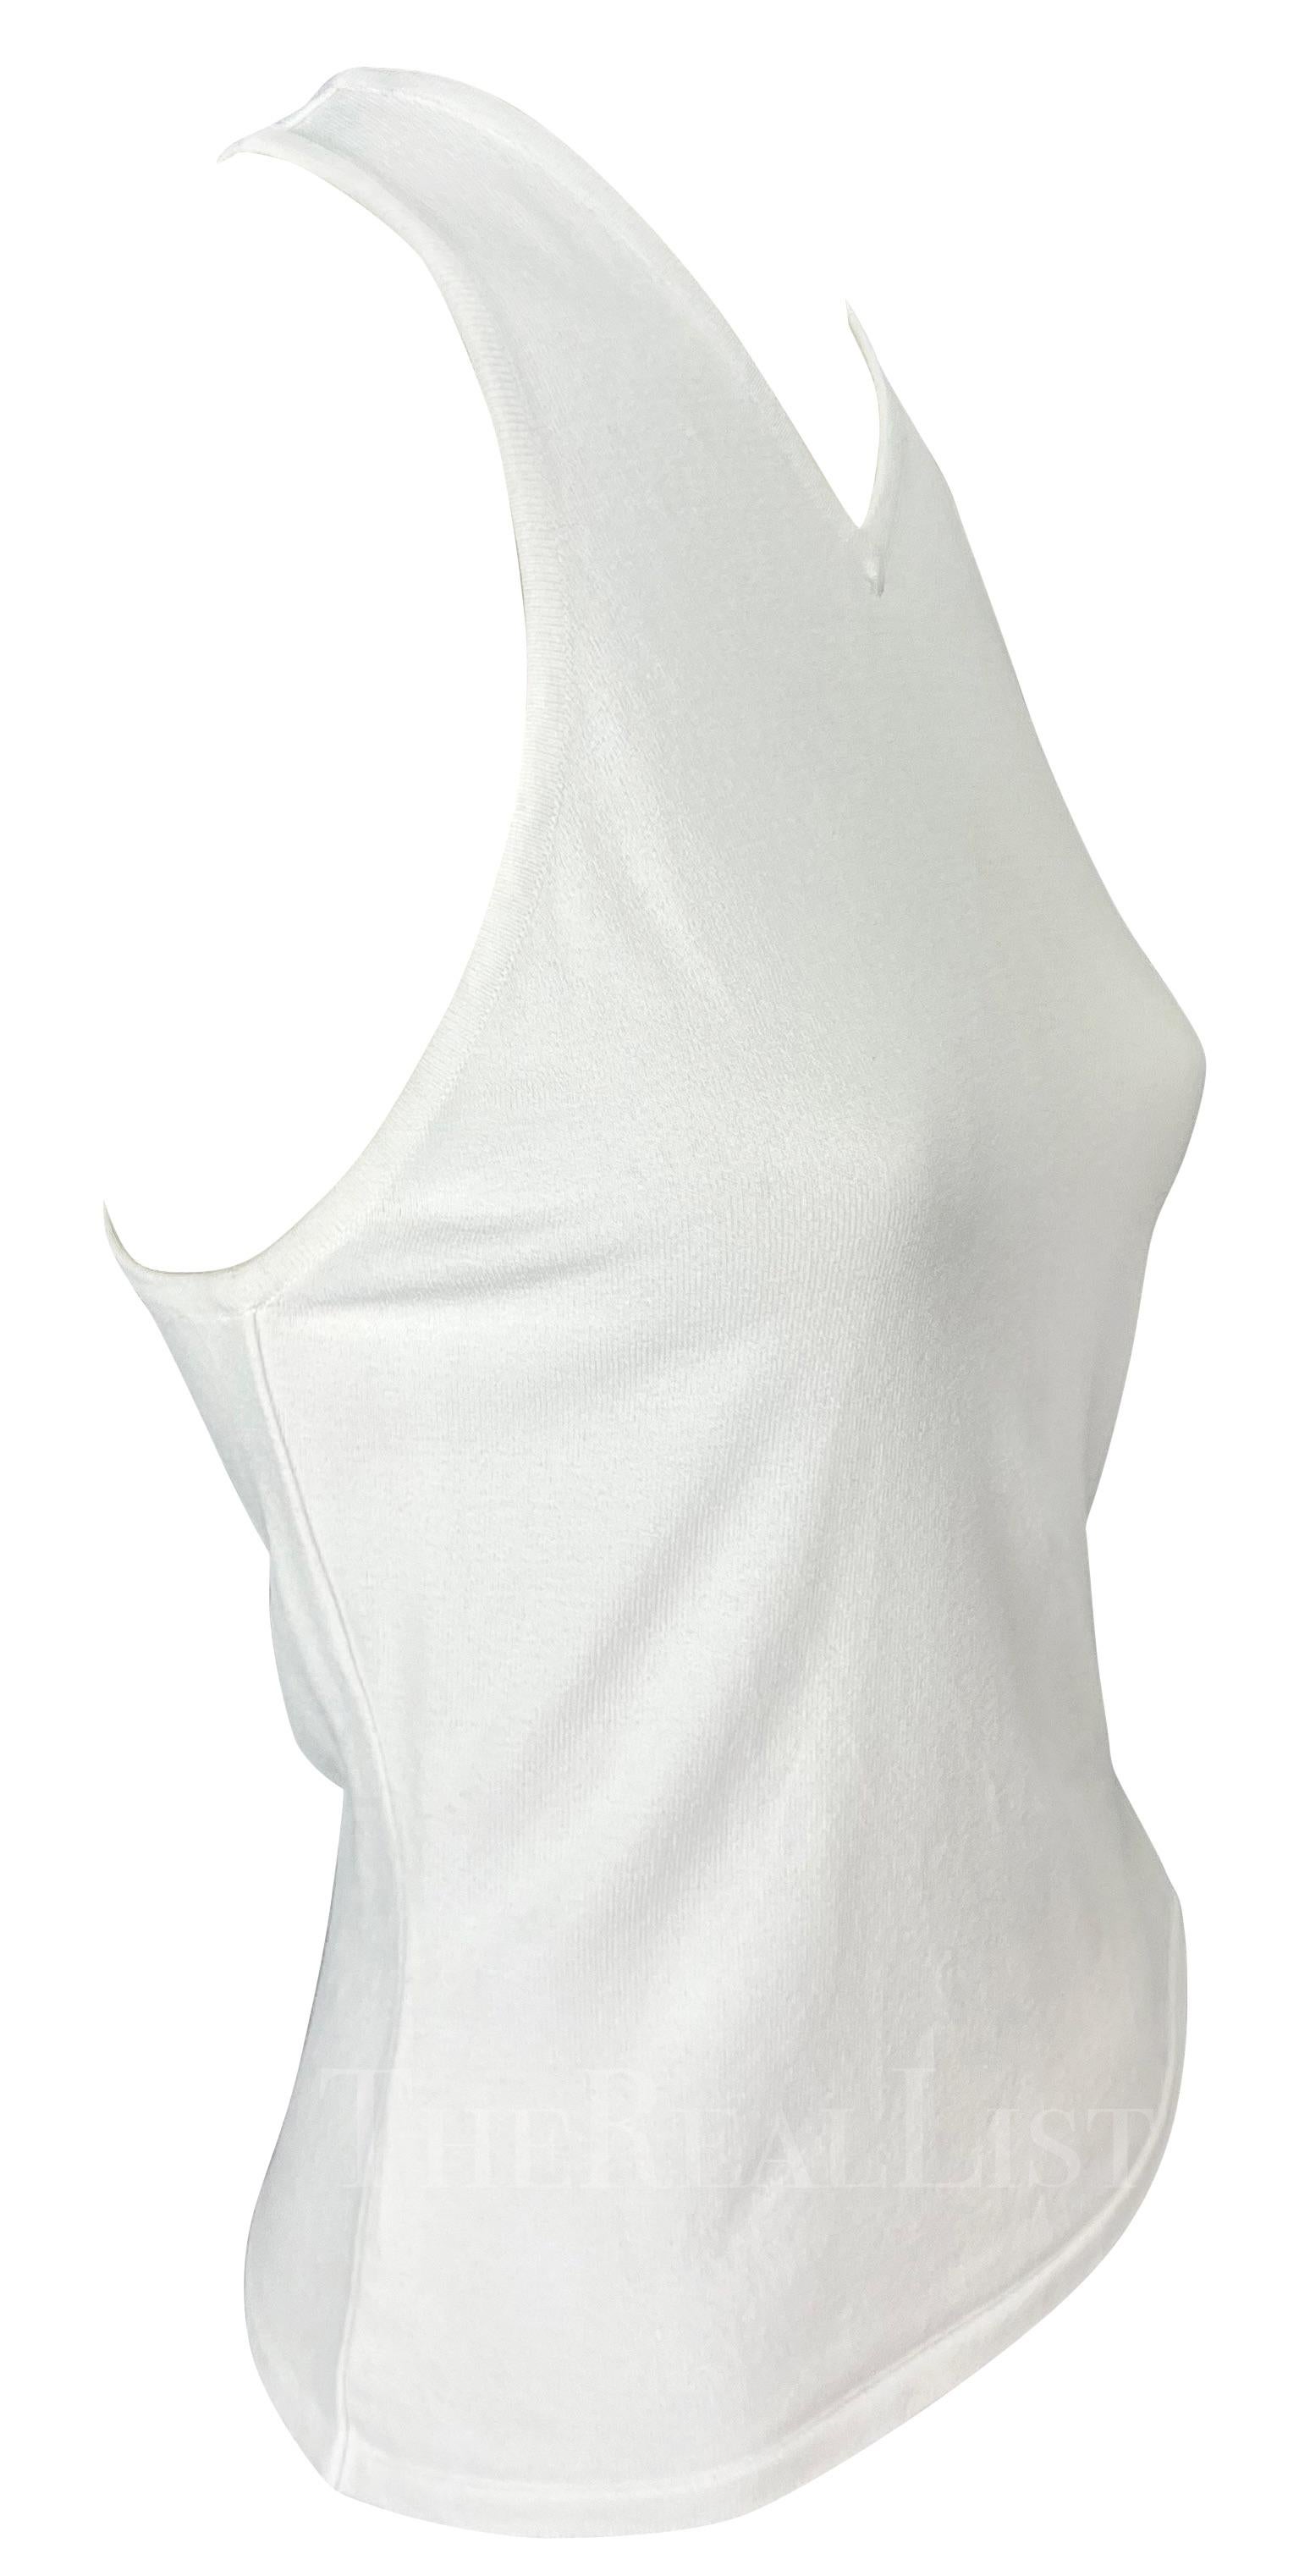 Women's S/S 1998 Gucci by Tom Ford White Stretch Knit Racerback Tank Top For Sale